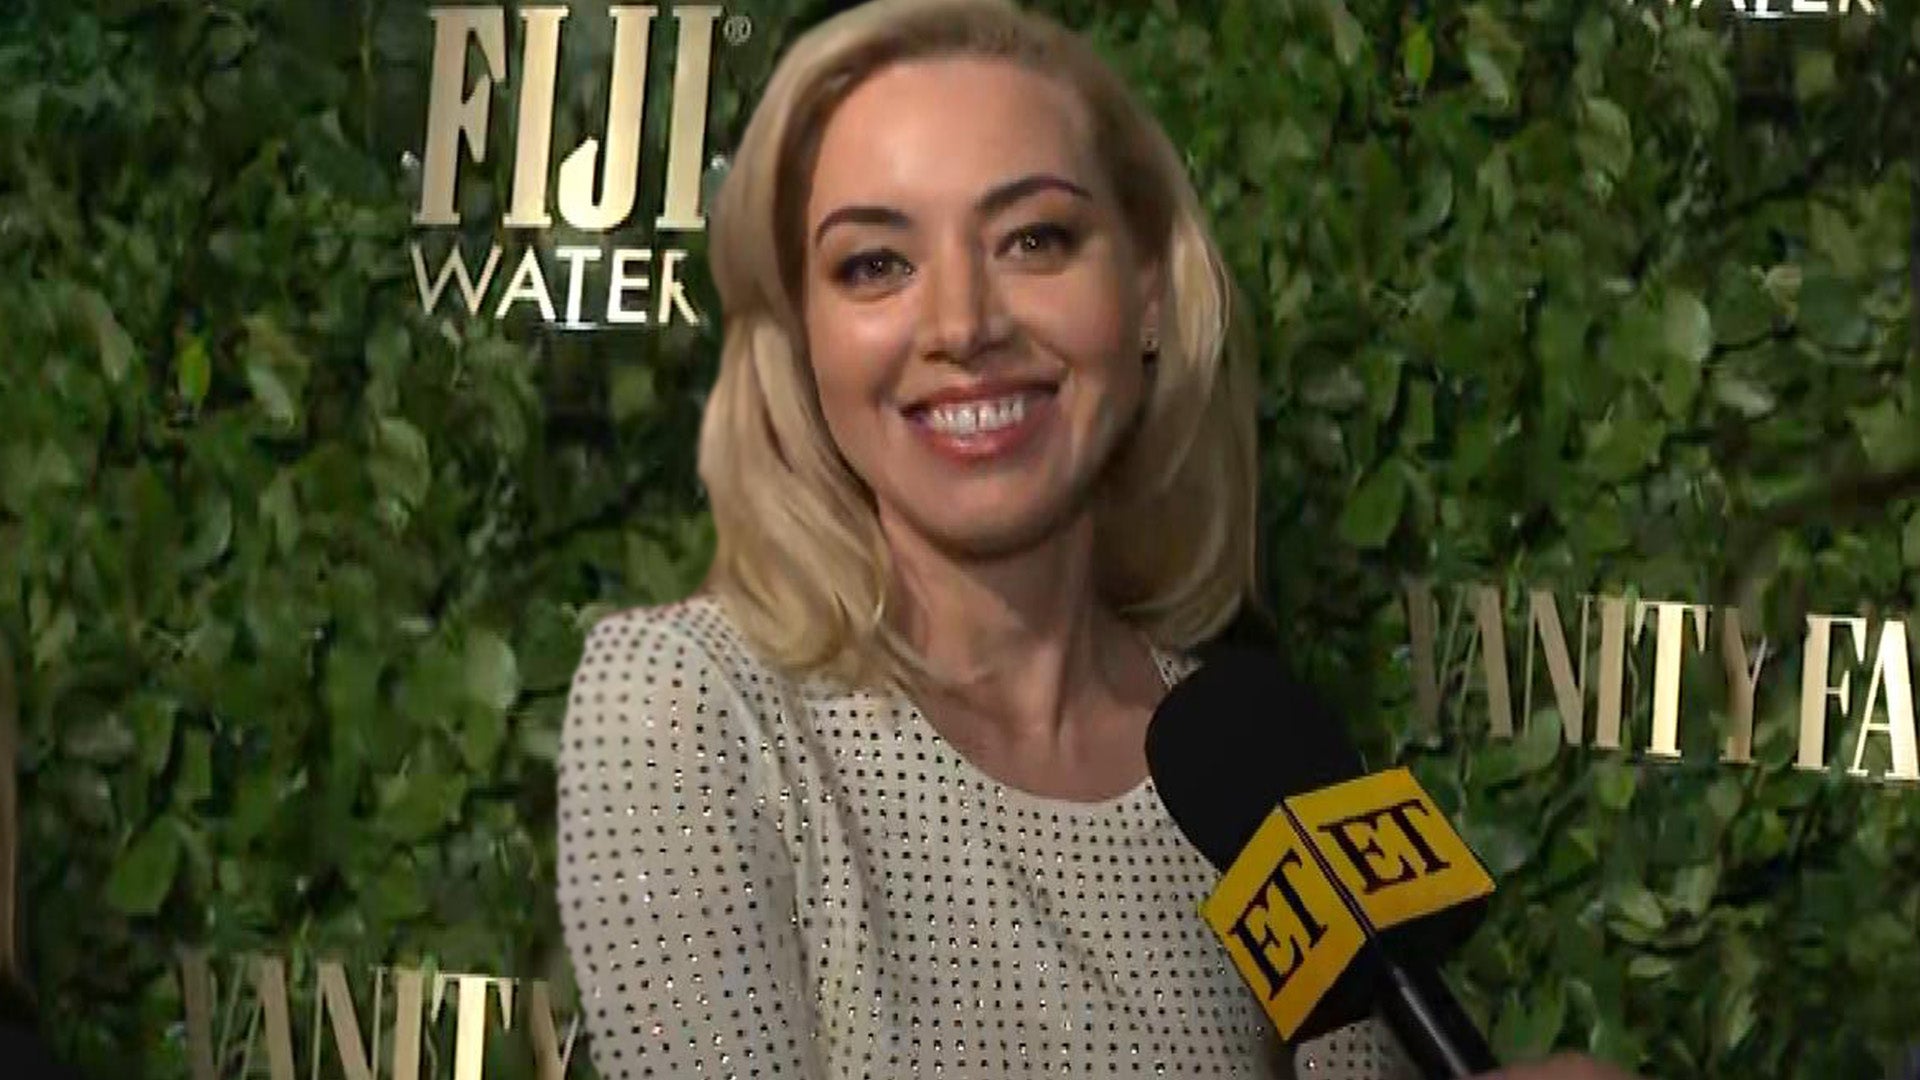 Aubrey Plaza Is Now a Blonde And Looks Drastically Different